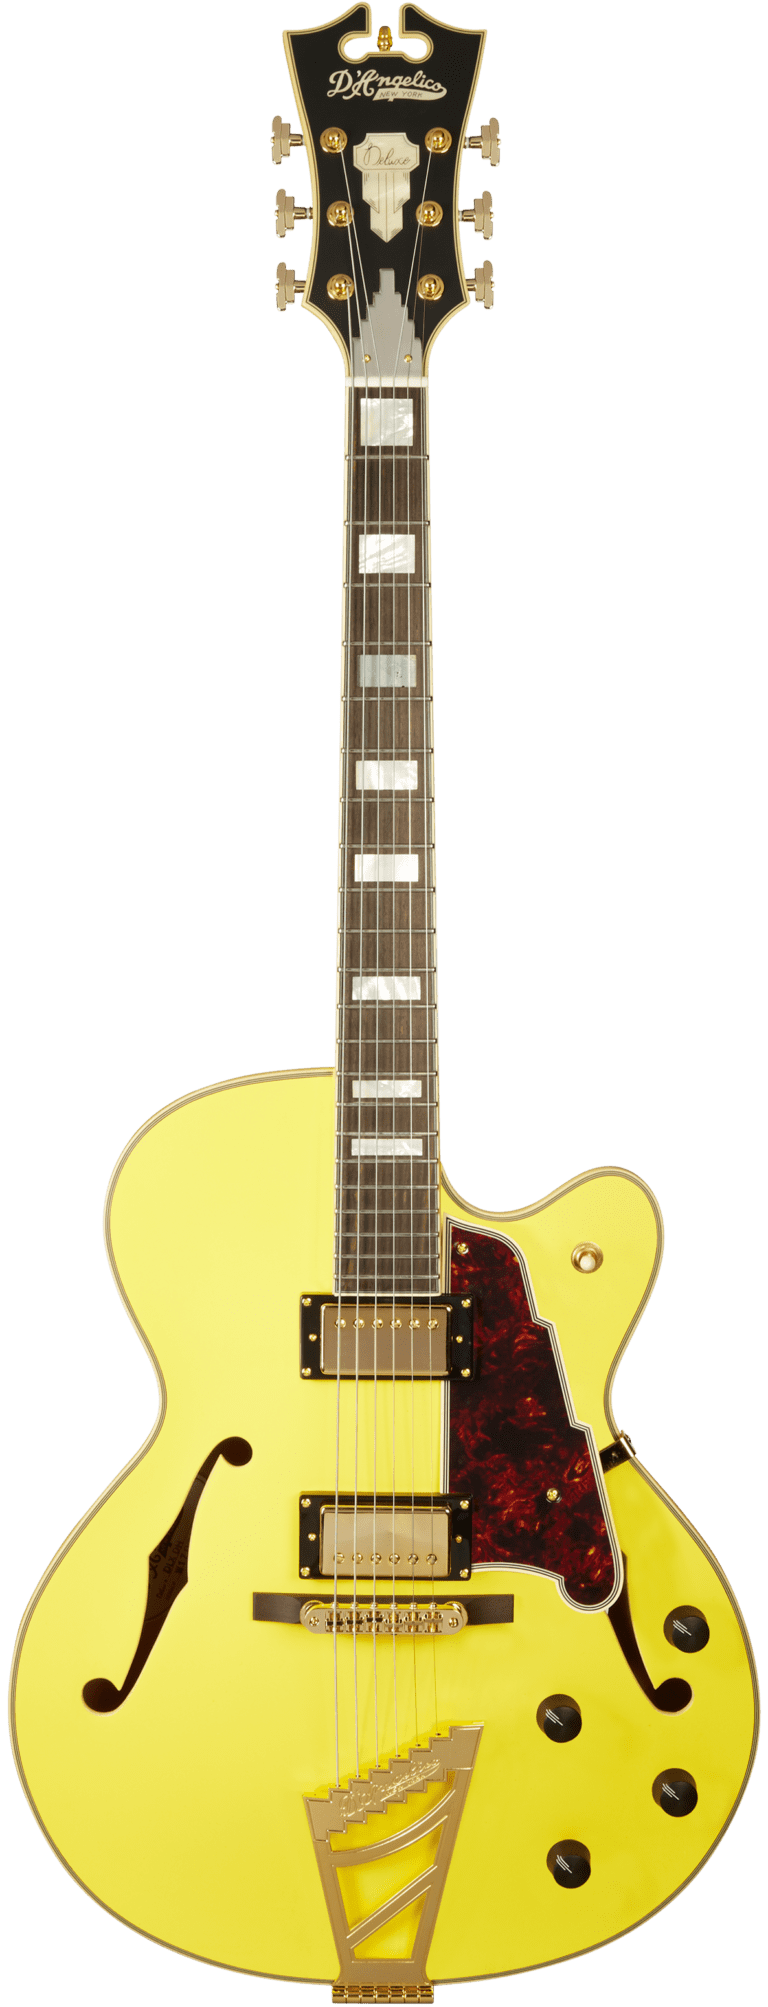 D'Angelico Deluxe DH Hollow-Body Electric Guitar - Matte Electric Yellow